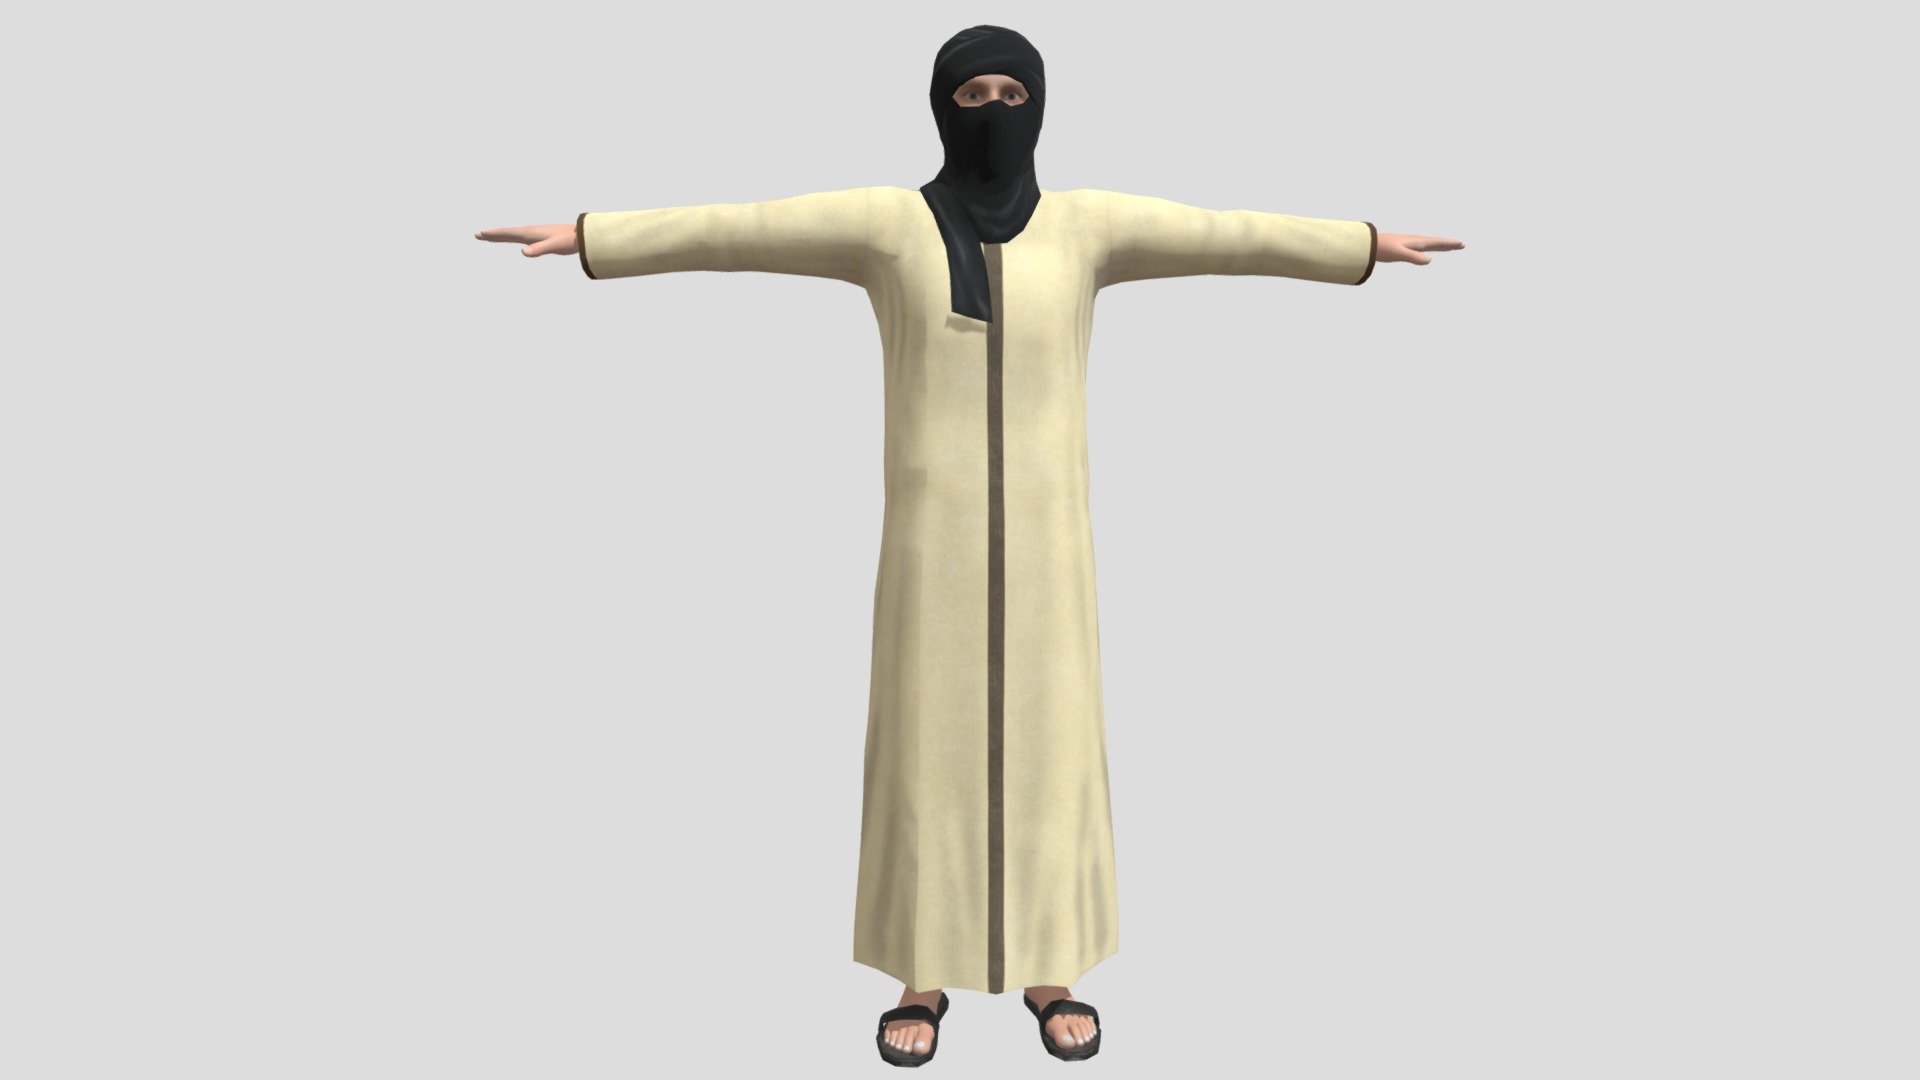 Description:
Arab Male 3D model is a high quality, photo real model that will enhance detail and realism to any of your game projects or commercials. The model has a fully textured, detailed design that allows for close-up renders. 

Features:
• High quality polygonal model with detailed texture, correctly scaled for an accurate representation of the original object.
• Maya 2019 V-Ray and standard materials scenes along with multiple other file formats.
• Texture files are given in .jpg formats for easy access.
• All preview images are rendered using Autodesk Maya vray
• No cleaning up necessary, just drop your models into the scene, Load the texture and start rendering.
• No special plugin needed to open scene 3d model